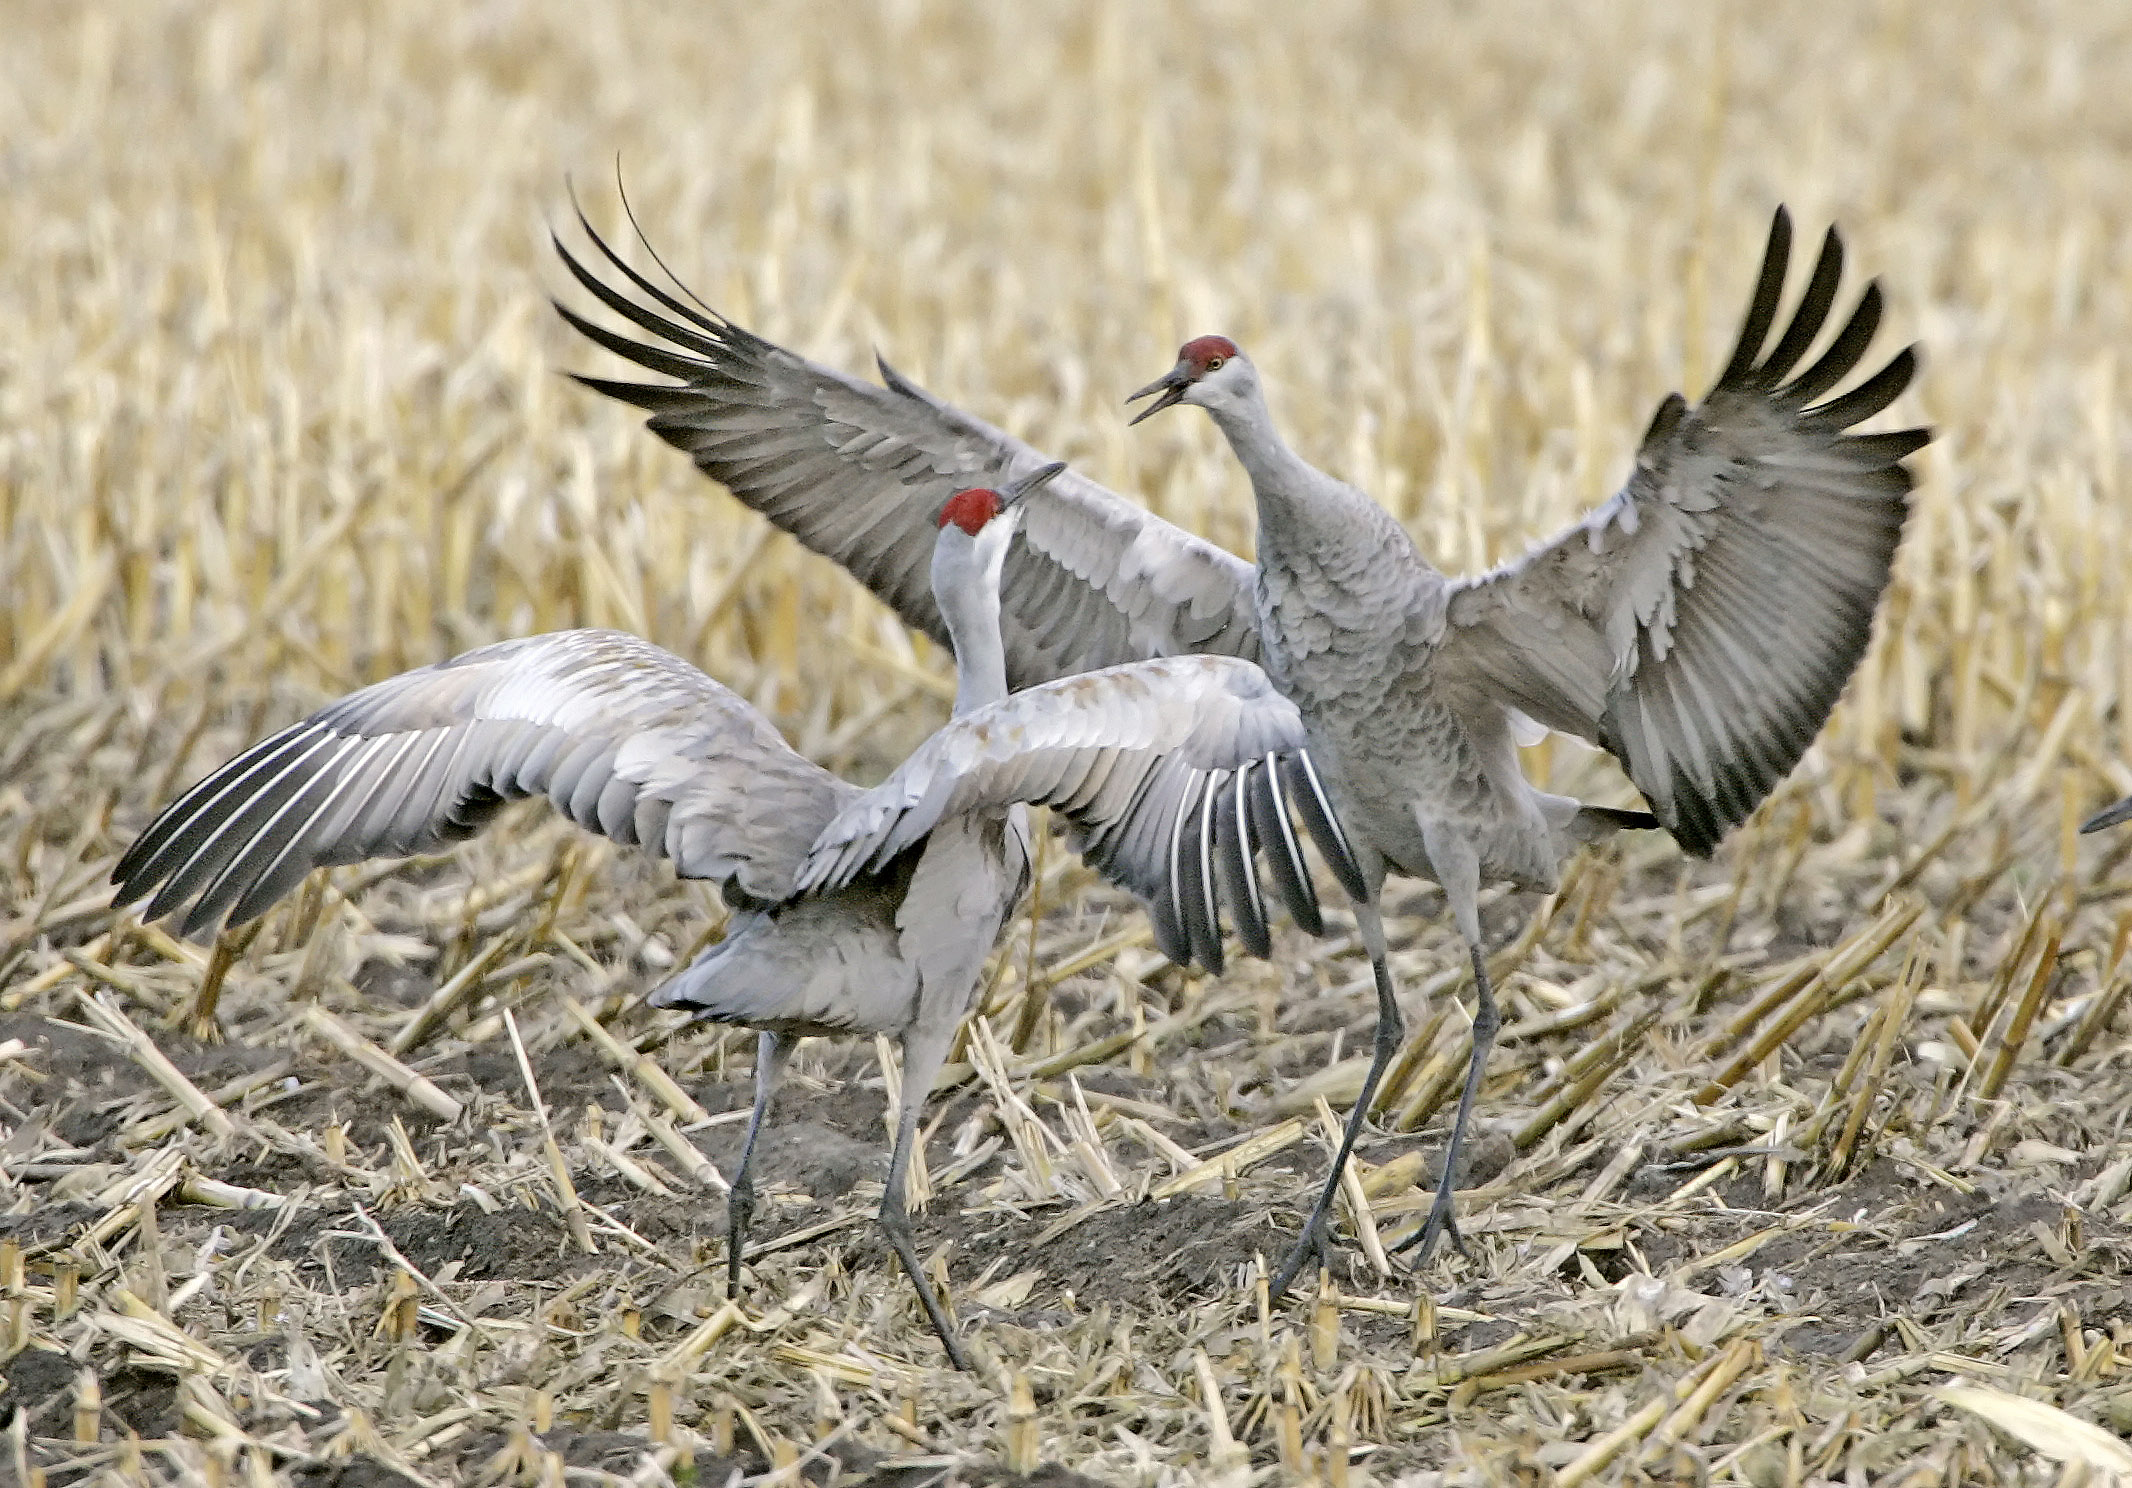 A ‘conservation success story’: first Great Midwest Crane Fest to celebrate recovery of sandhill cranes